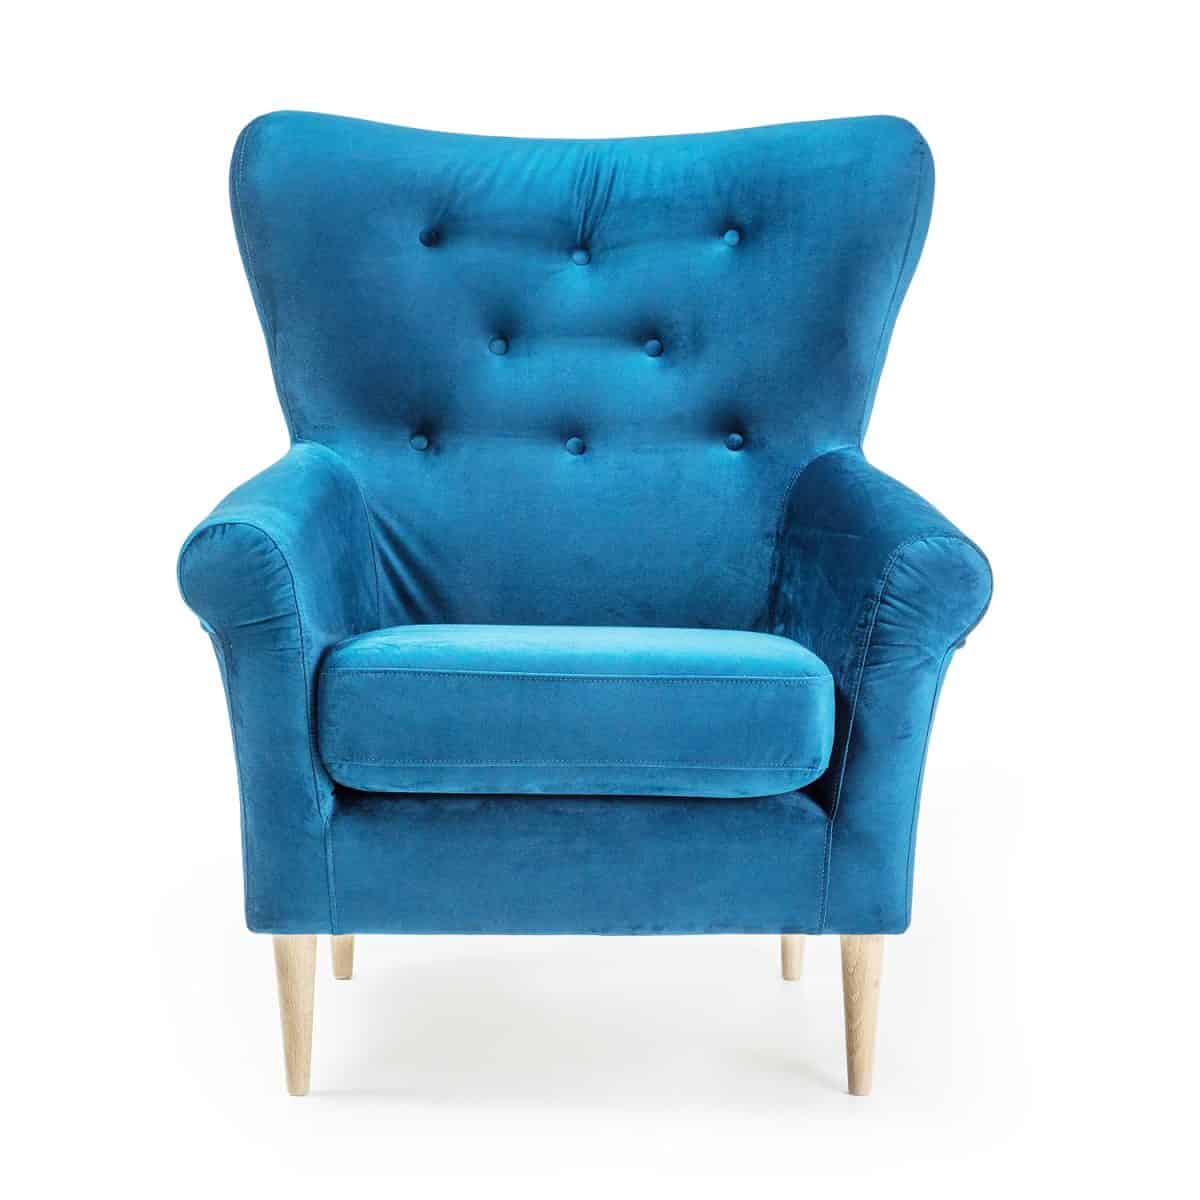 Turquoise Arm Chair Isolated on White Background. Front View of Upholstered Wingback Accent Sofa. Classic Tufted Armchair with Wooden Feet Teal Blue Velvet Upholstery.